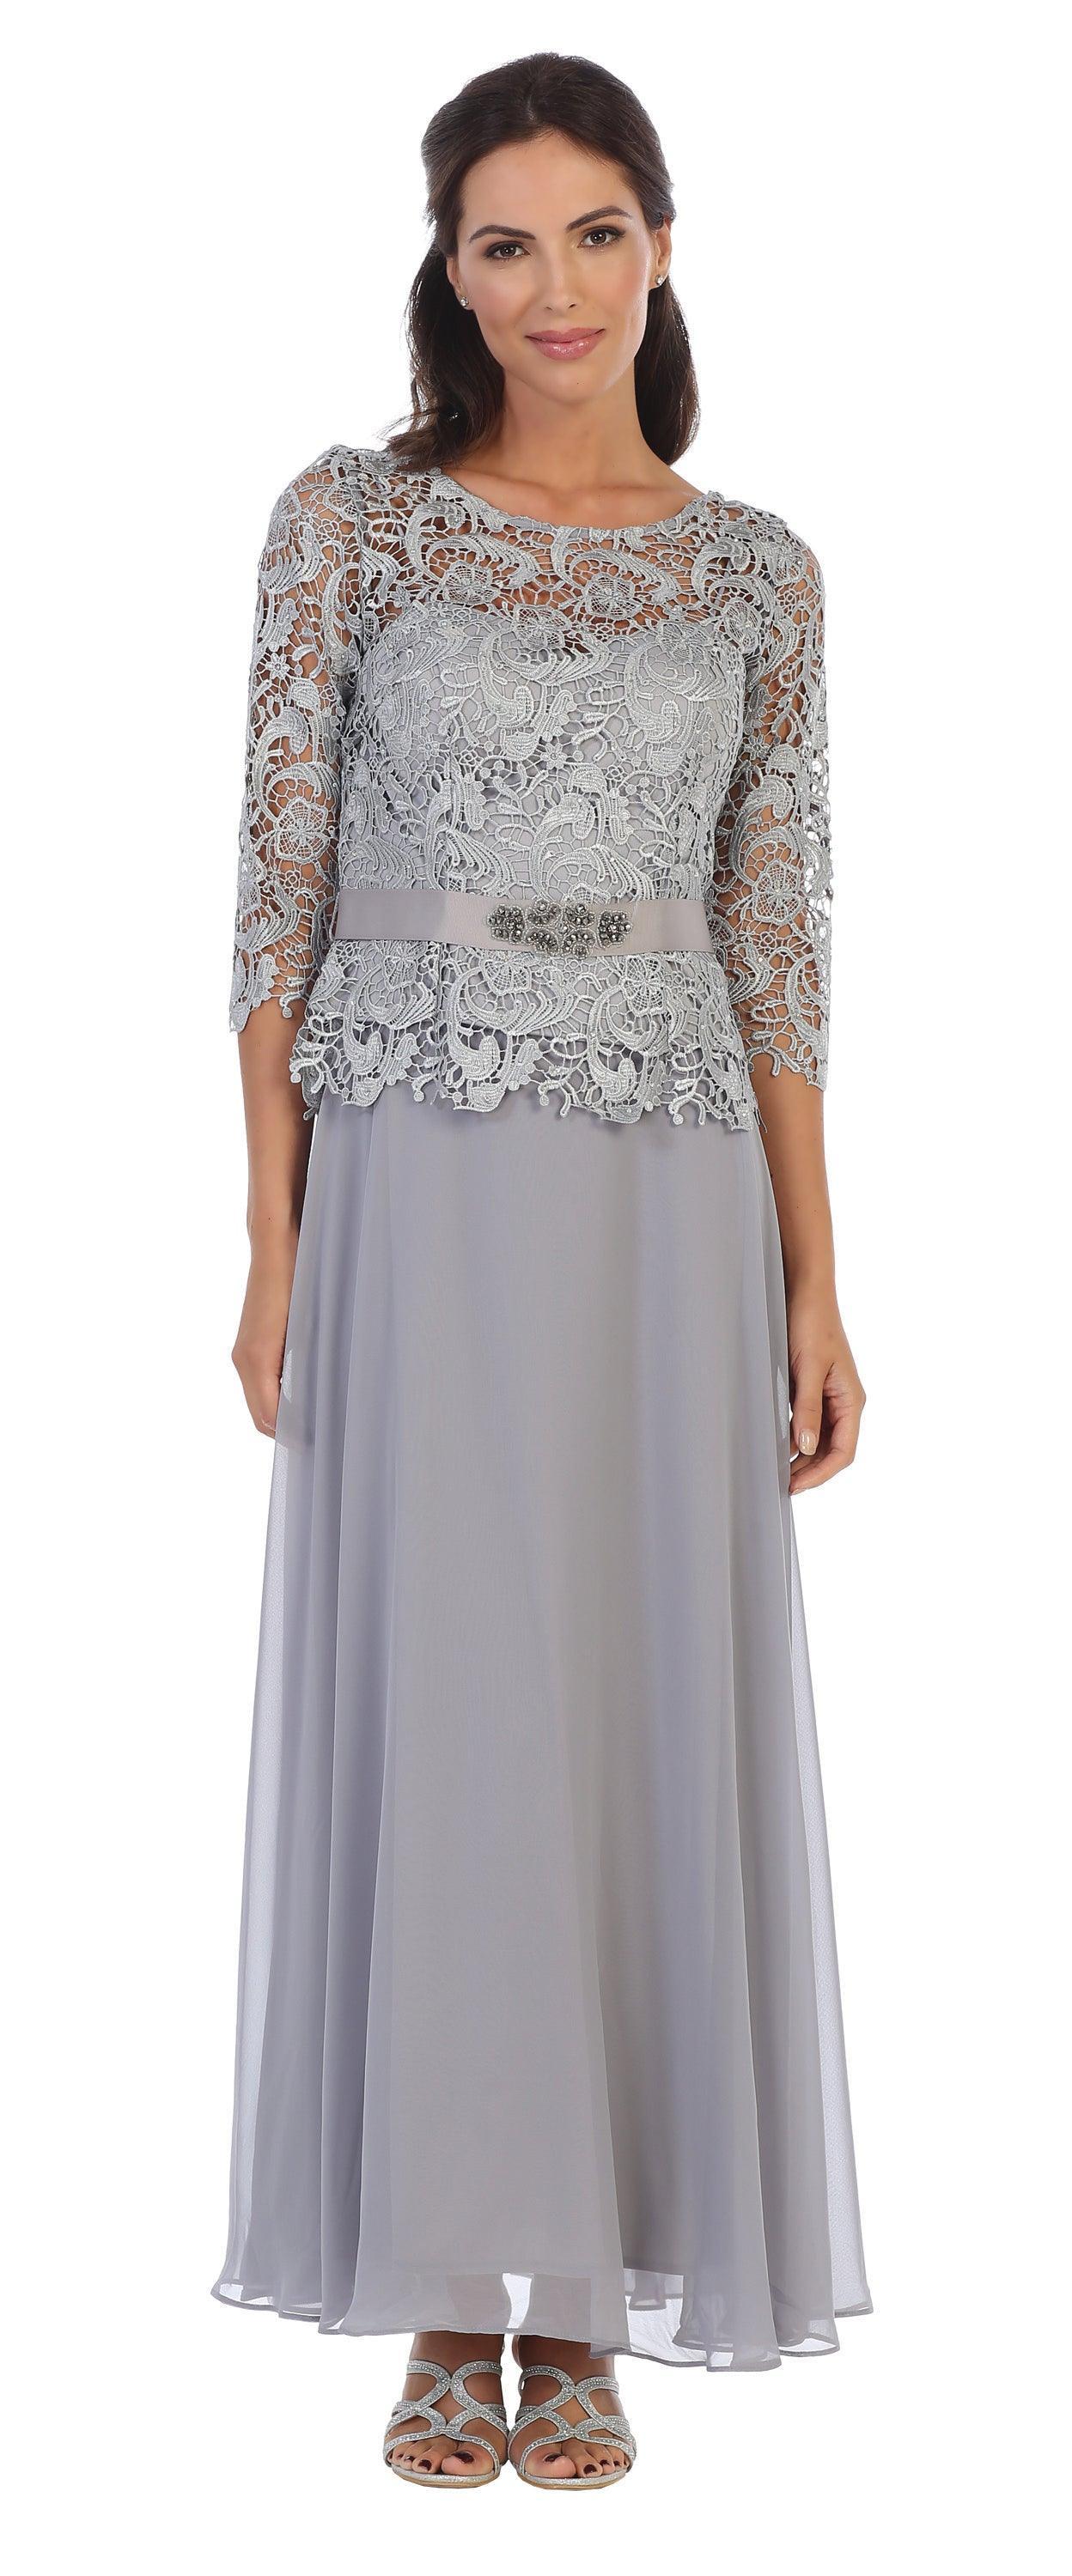 Long Mother of the Bride Lace Chiffon Formal Gown Sale - The Dress Outlet